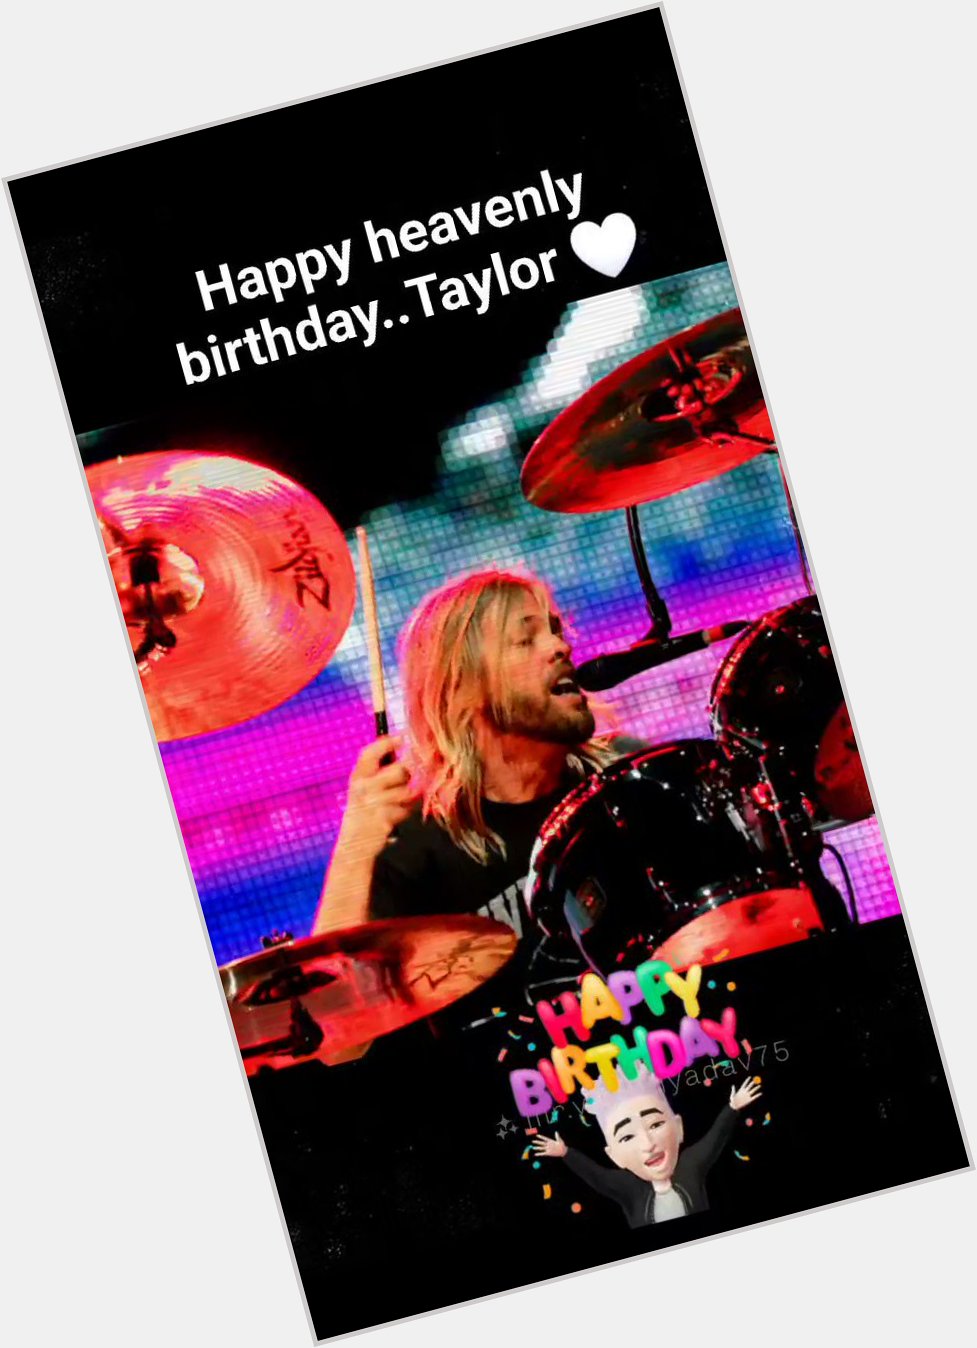 Happy heavenly birthday to Oliver Taylor Hawkins (February 17,1972 - March 25,2022)  